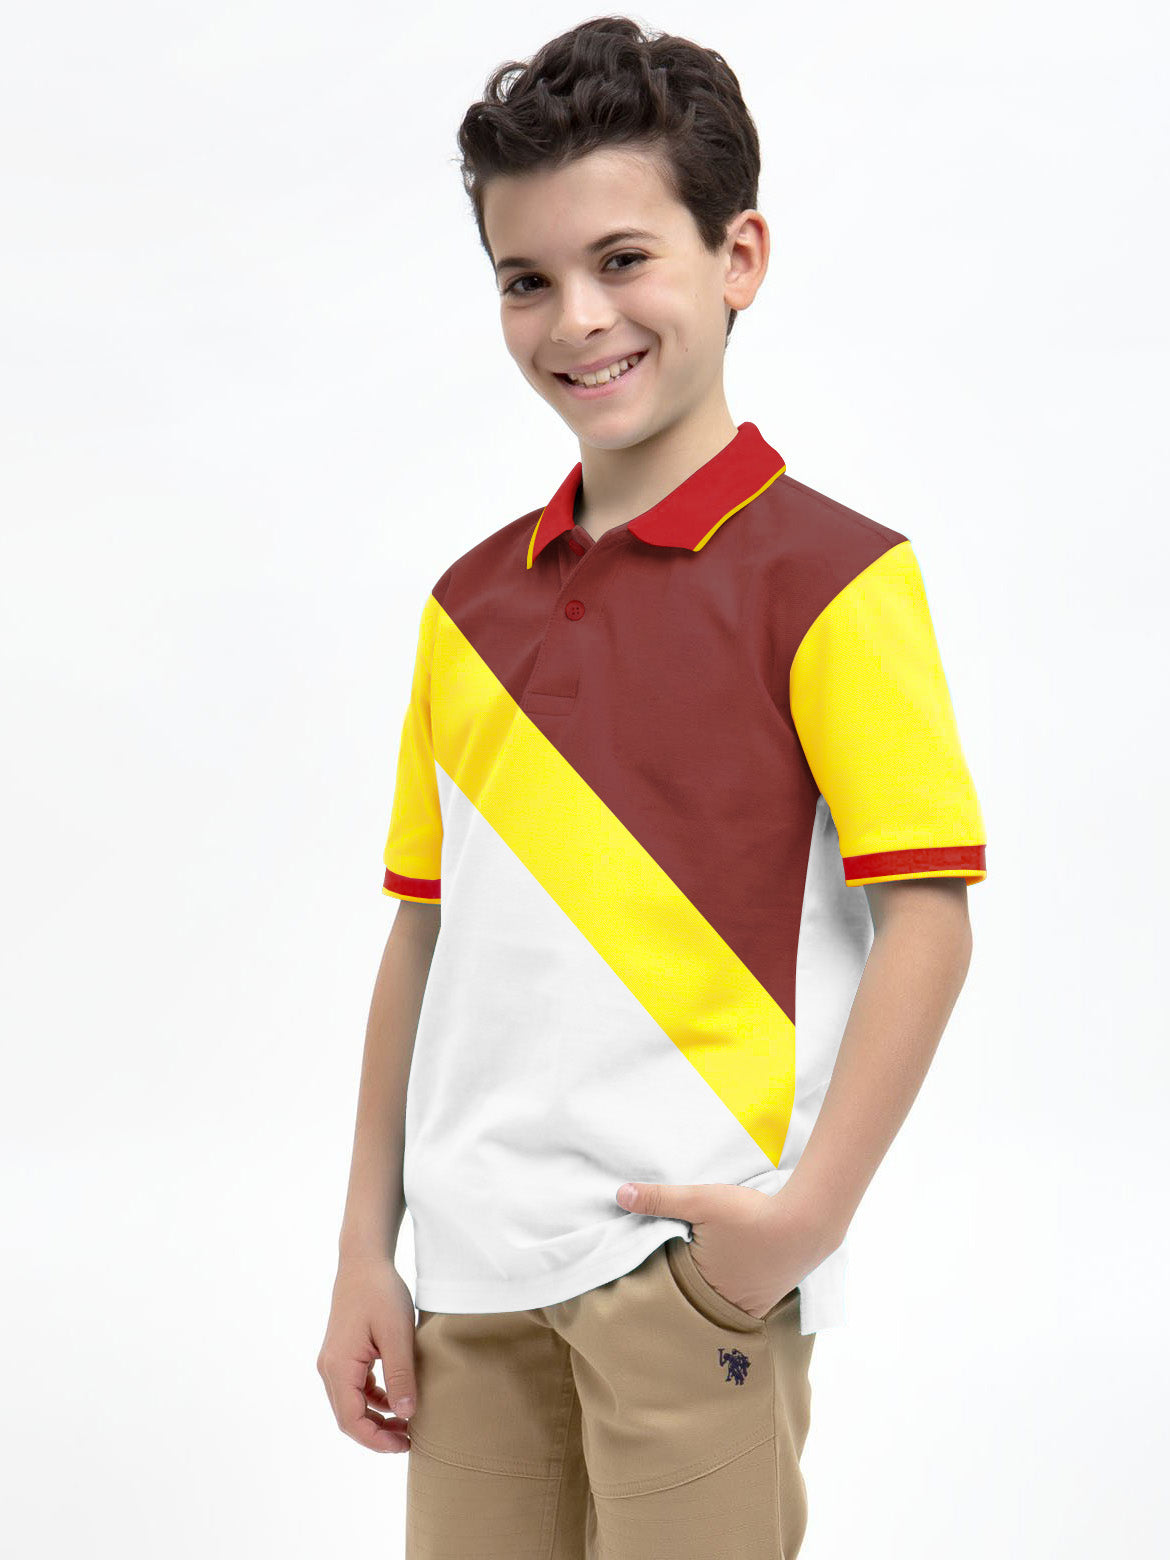 Champion Single Jersey Polo Shirt For Kids-Peach with Yellow & Red-SP1702/RT2412